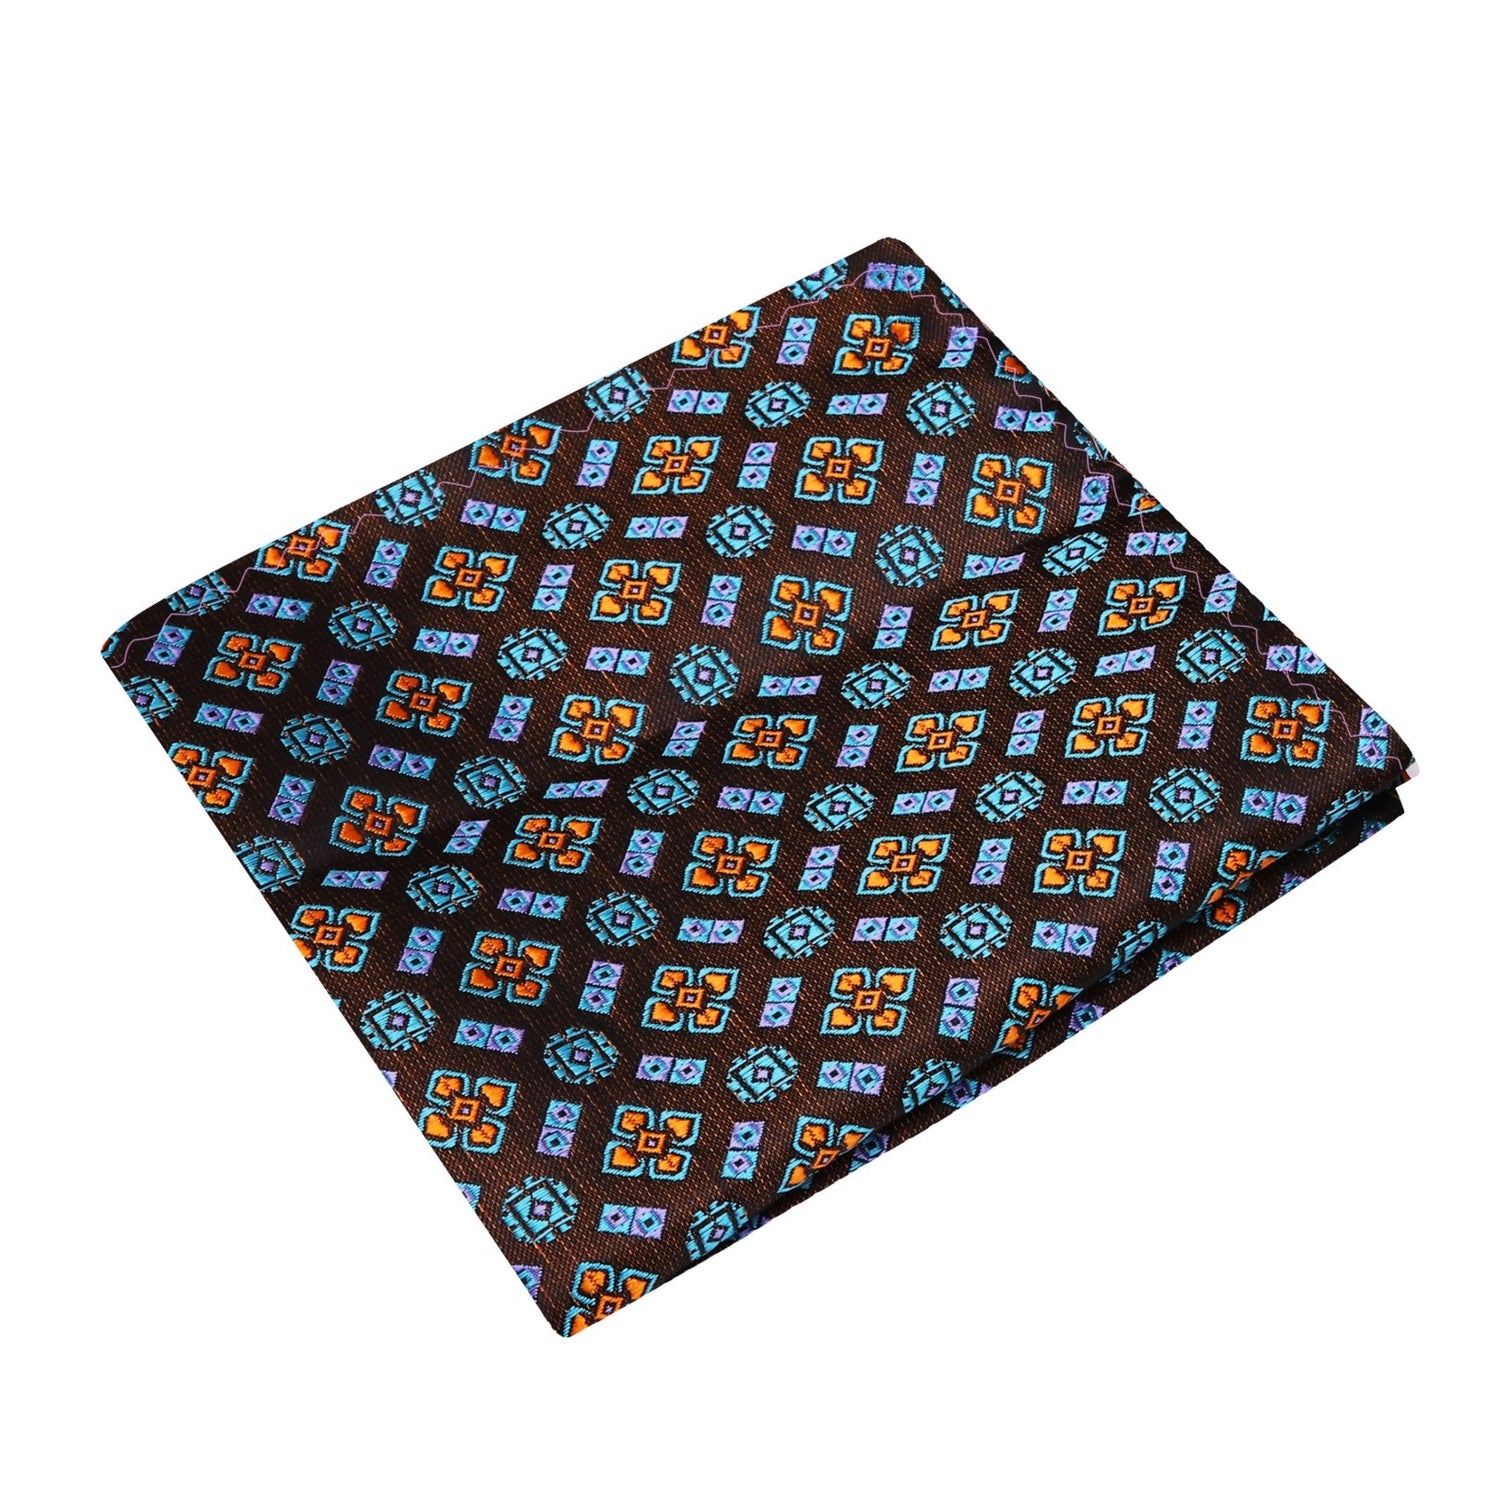 A Teal, Orange Abstract Shapes Pattern Silk Pocket Square